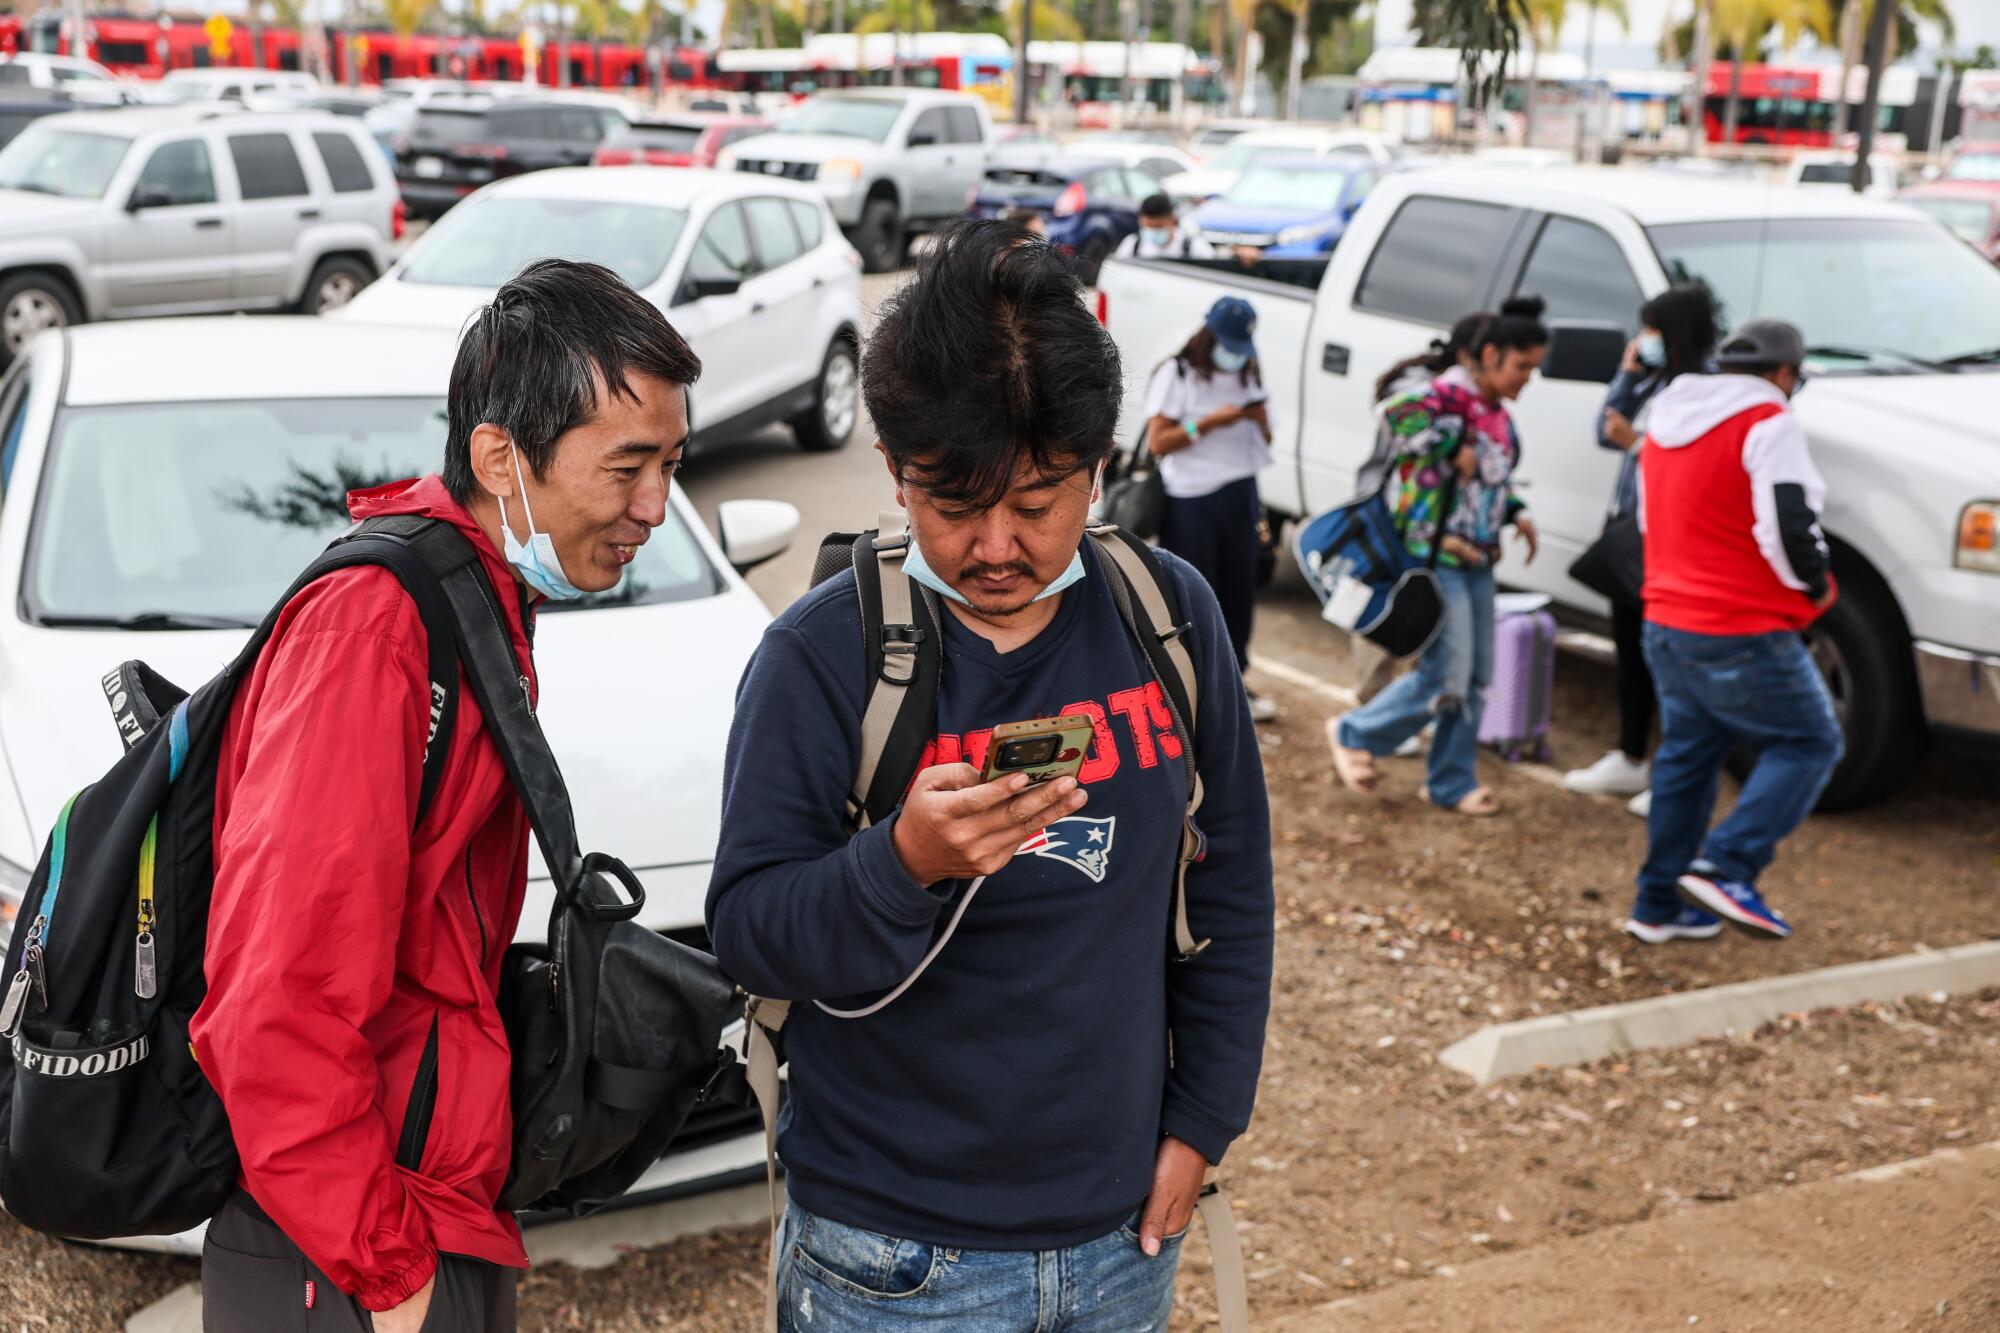 Chinese citizen Zhang Hao uses his phone to book a taxi in the parking lot of a bus station.